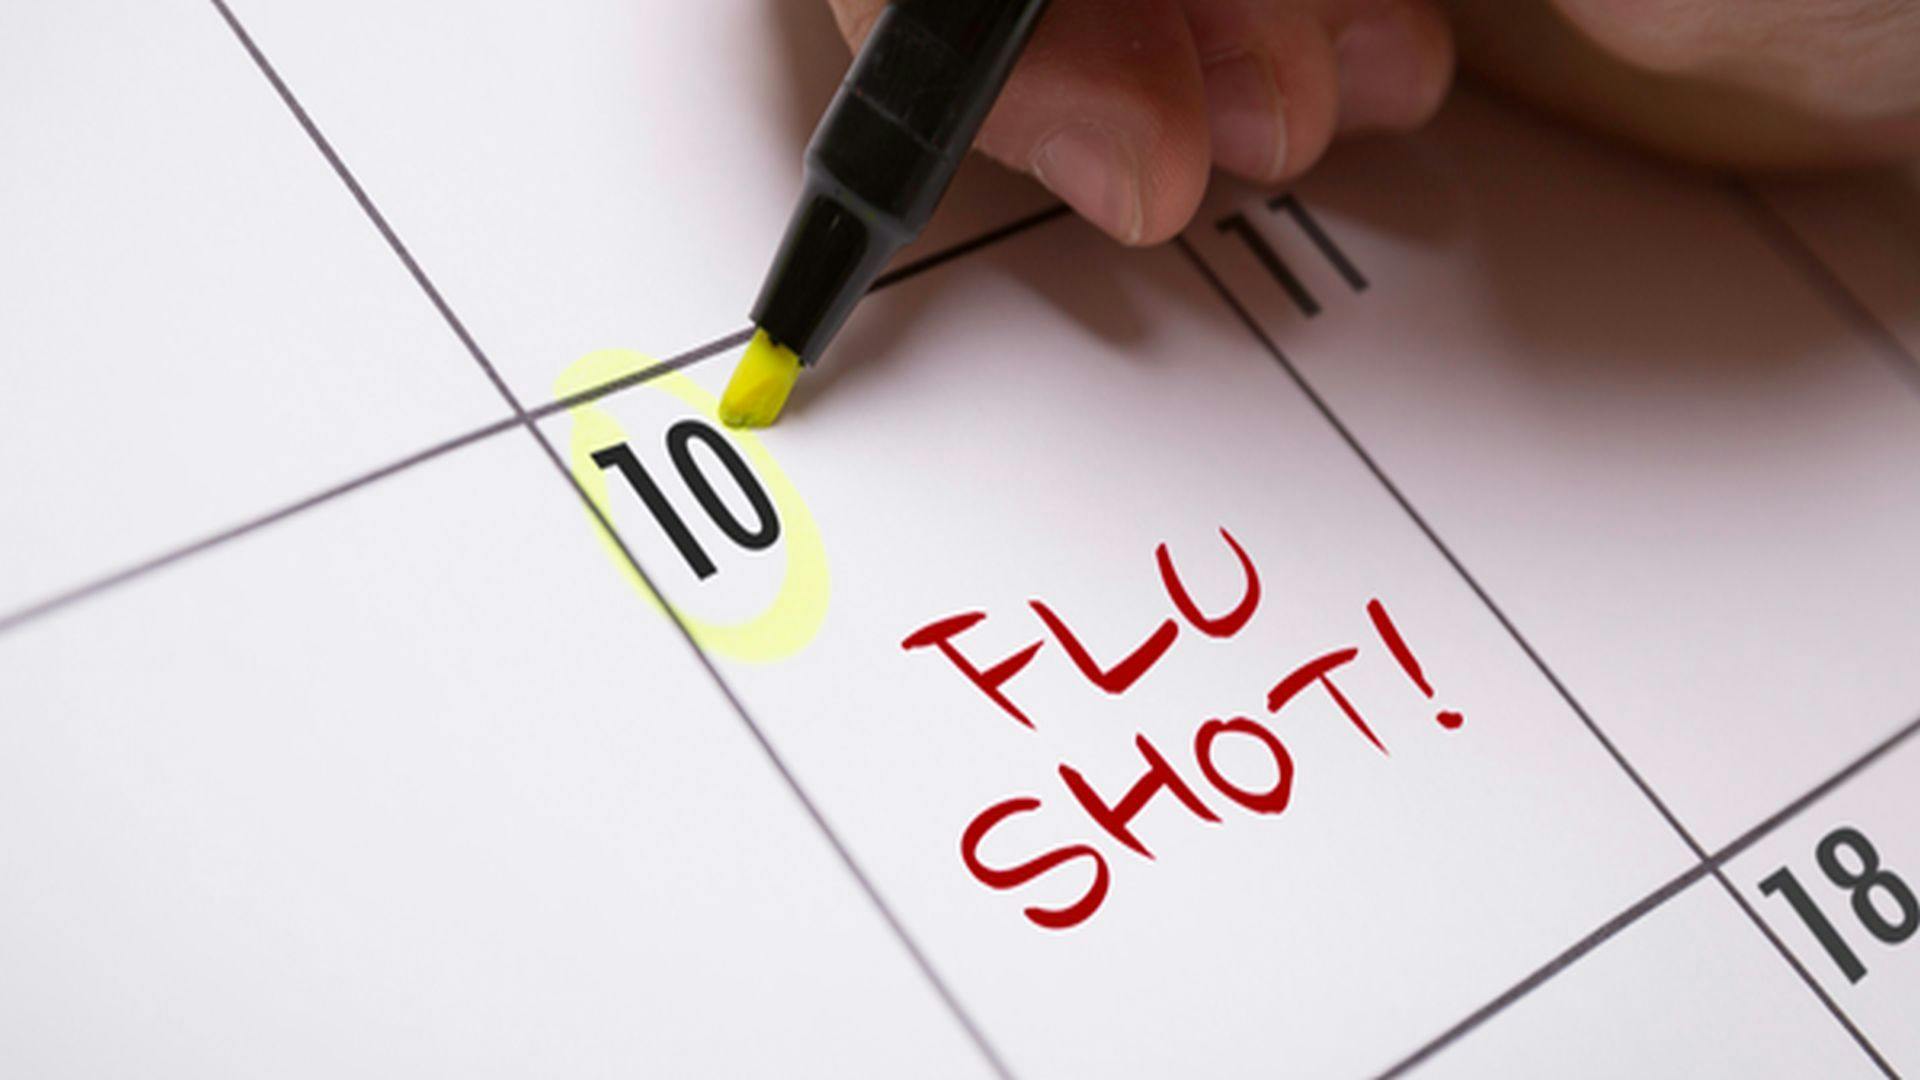 Repeated Influenza Vaccination Helps Prevent Severe Flu in Older Adults